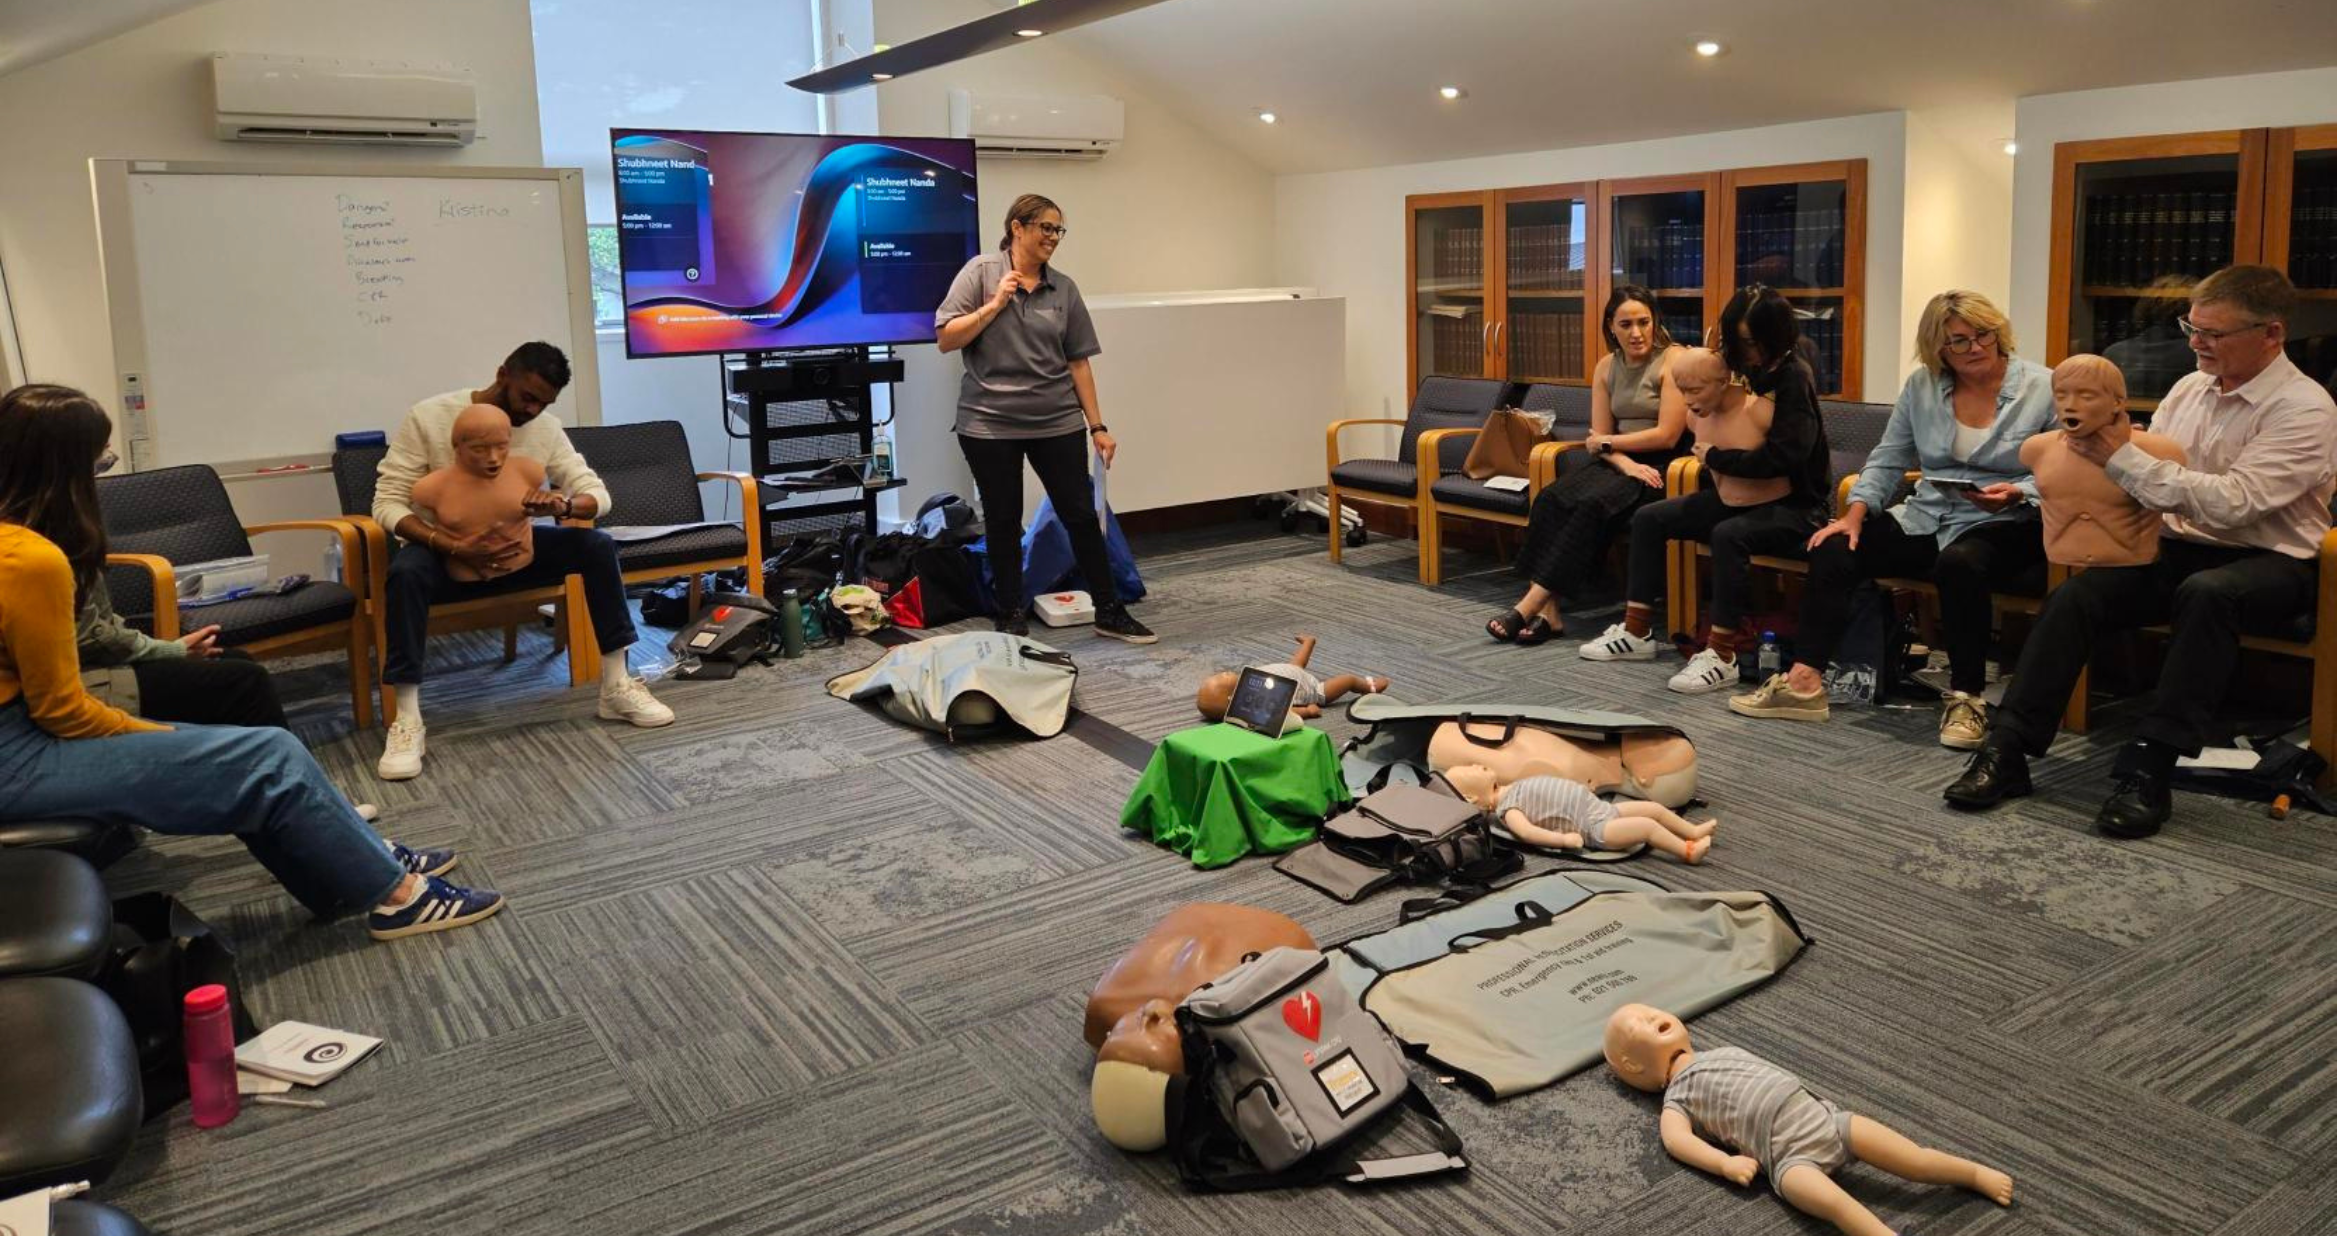 CPR and First Aid Training Course March 24